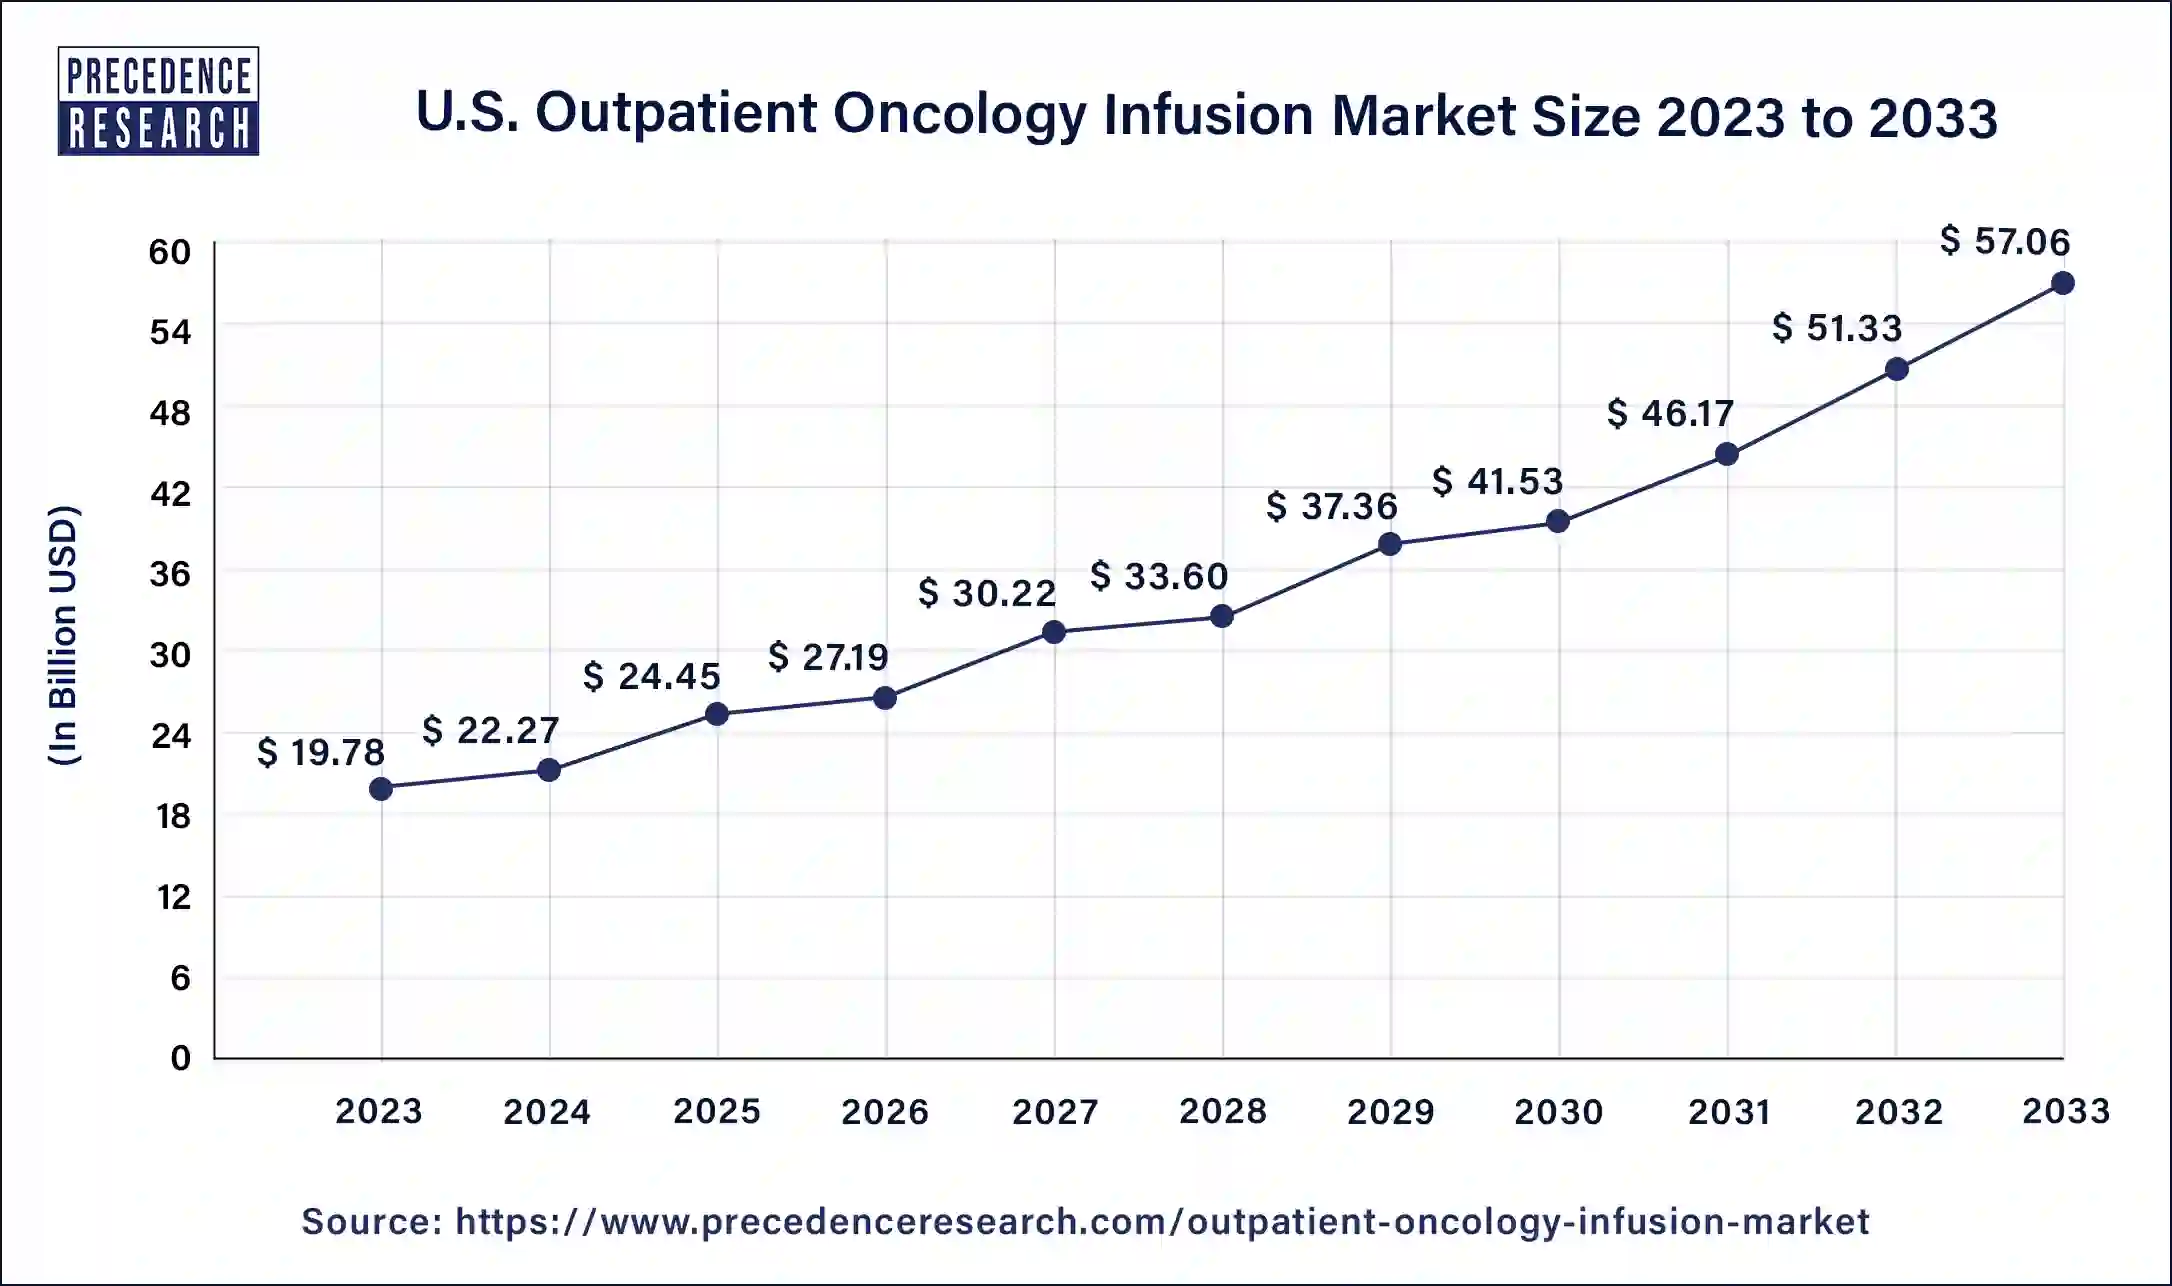 U.S. Outpatient Oncology Infusion Market Size 2024 to 2033